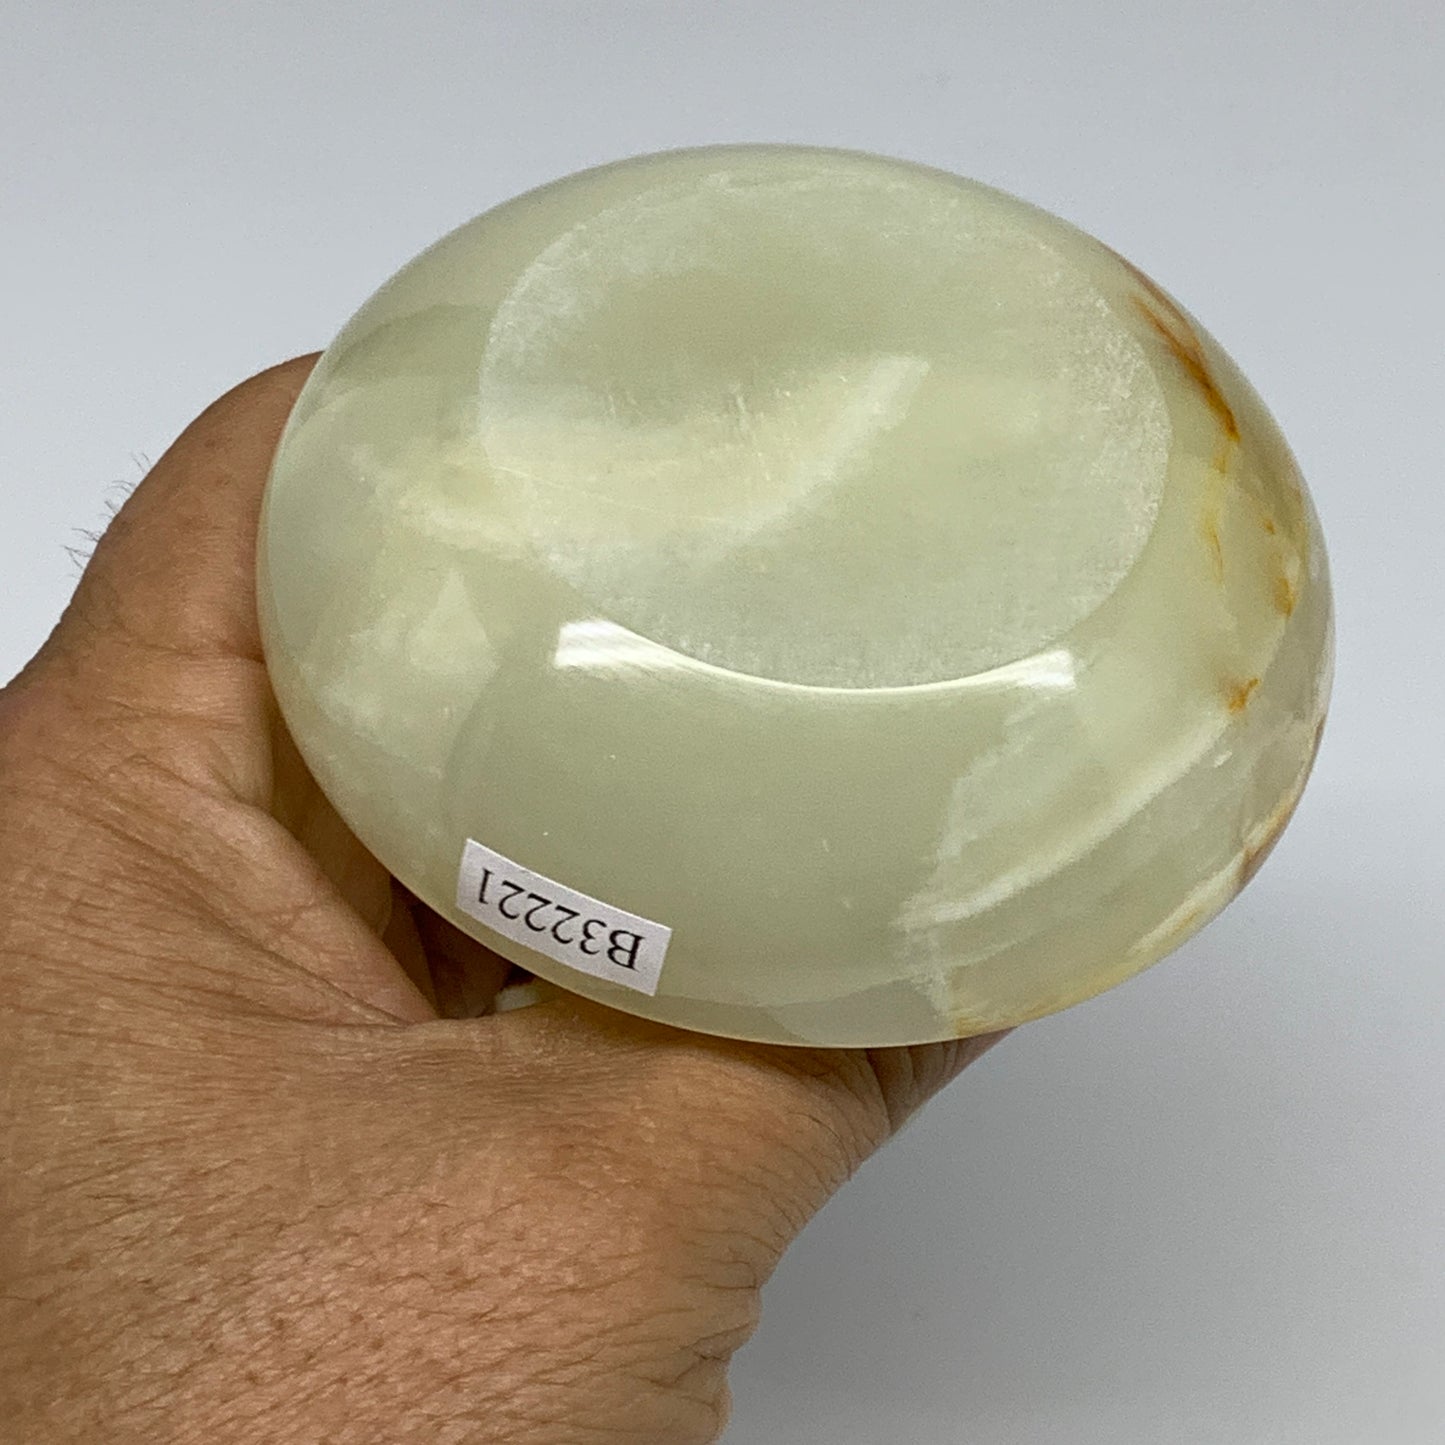 200g, 2.7"x1.4"x2.9", Natural Green Onyx Candle Holder Gemstone Carved, B32221